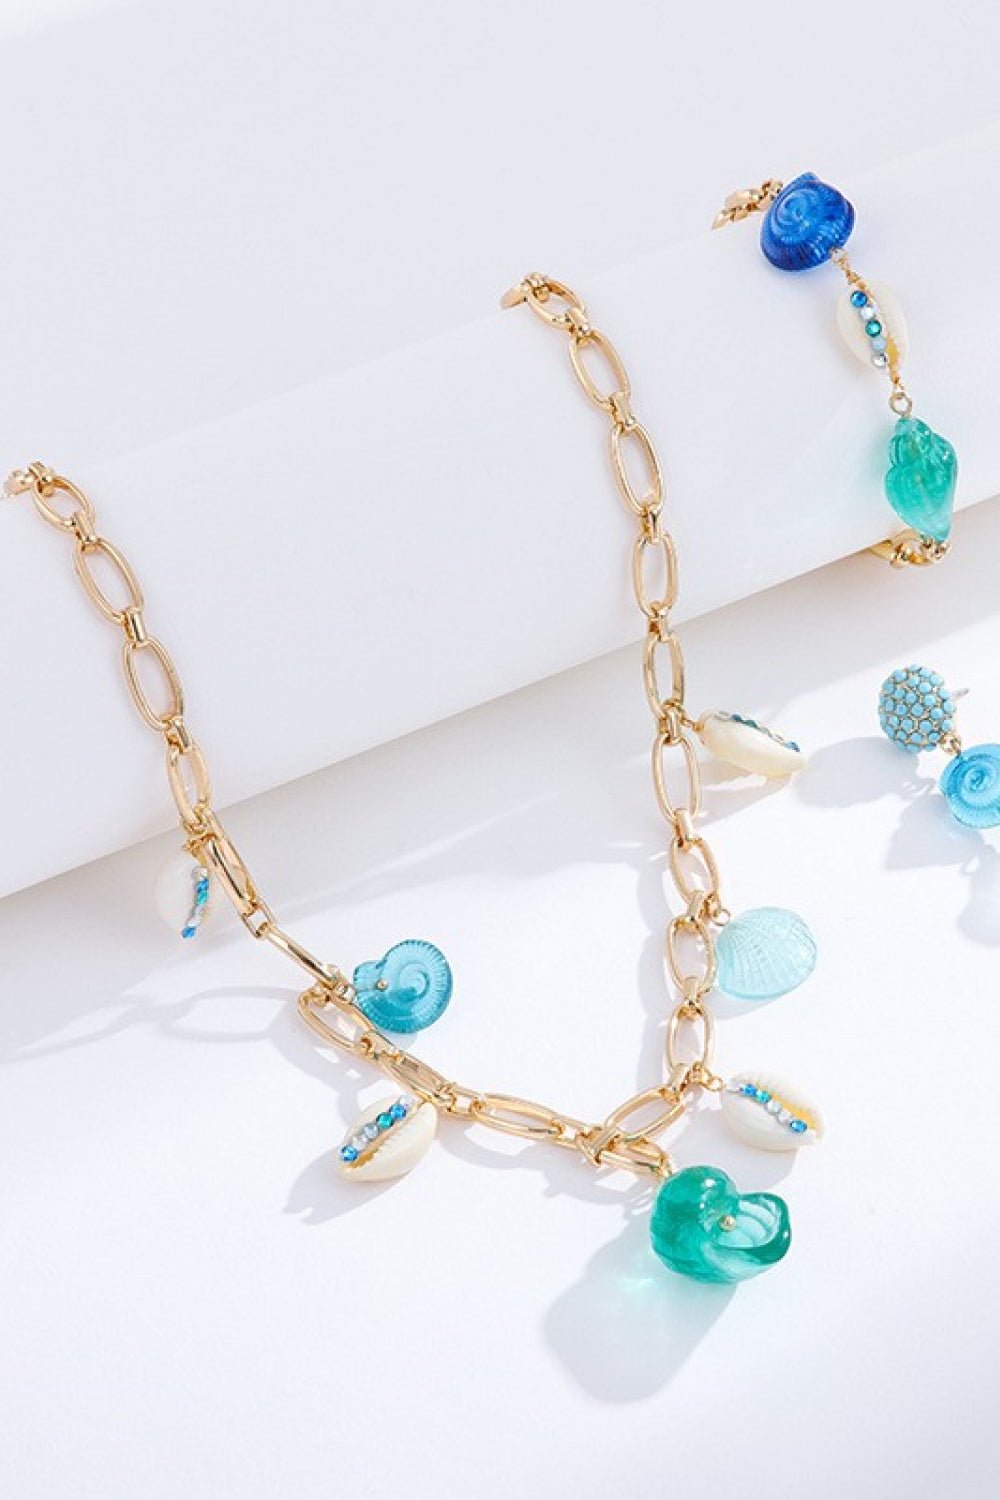 18K Gold Plated Multi-Charm Necklace in Blue + WhiteNecklaceBeach Rose Co.